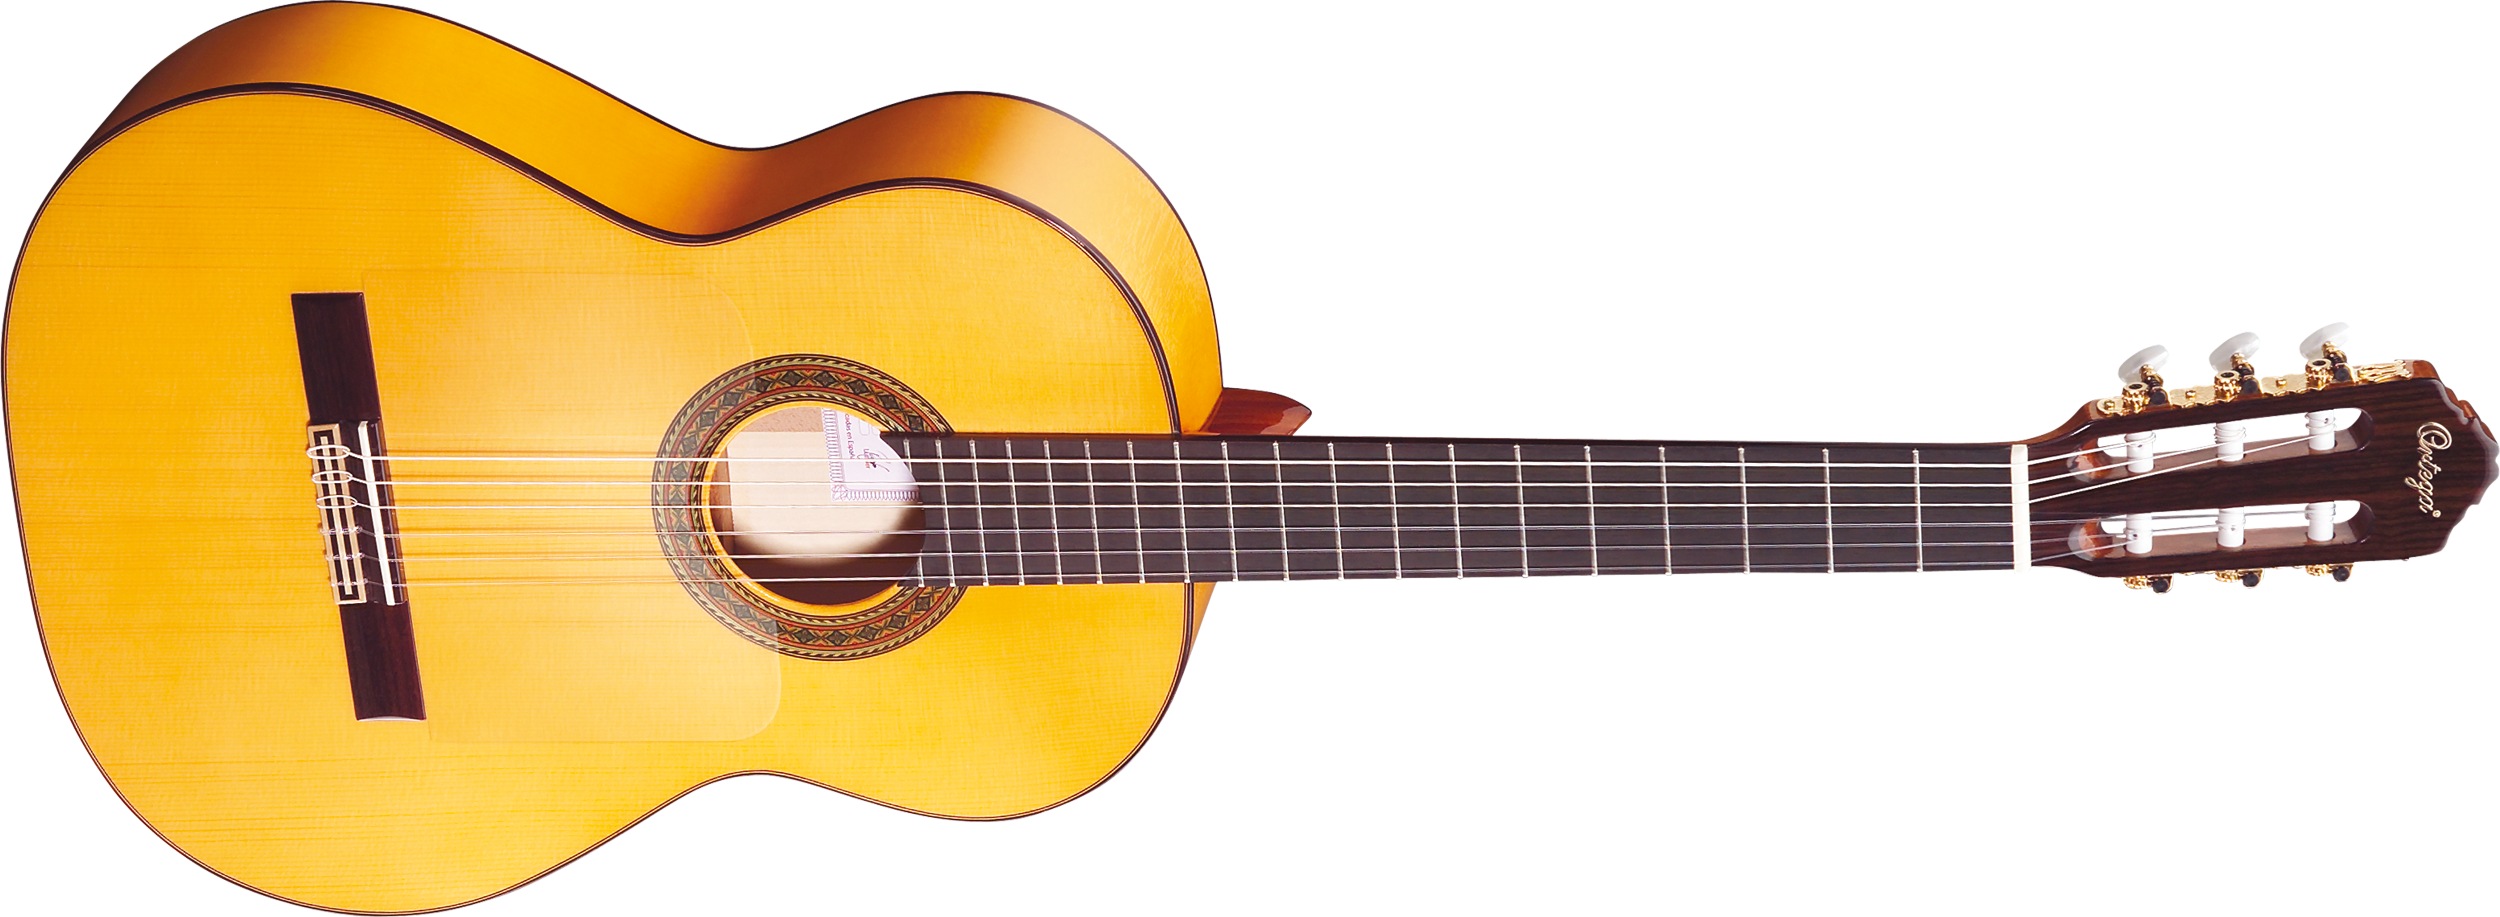 Guitar Acoustic File Download HD PNG Clipart